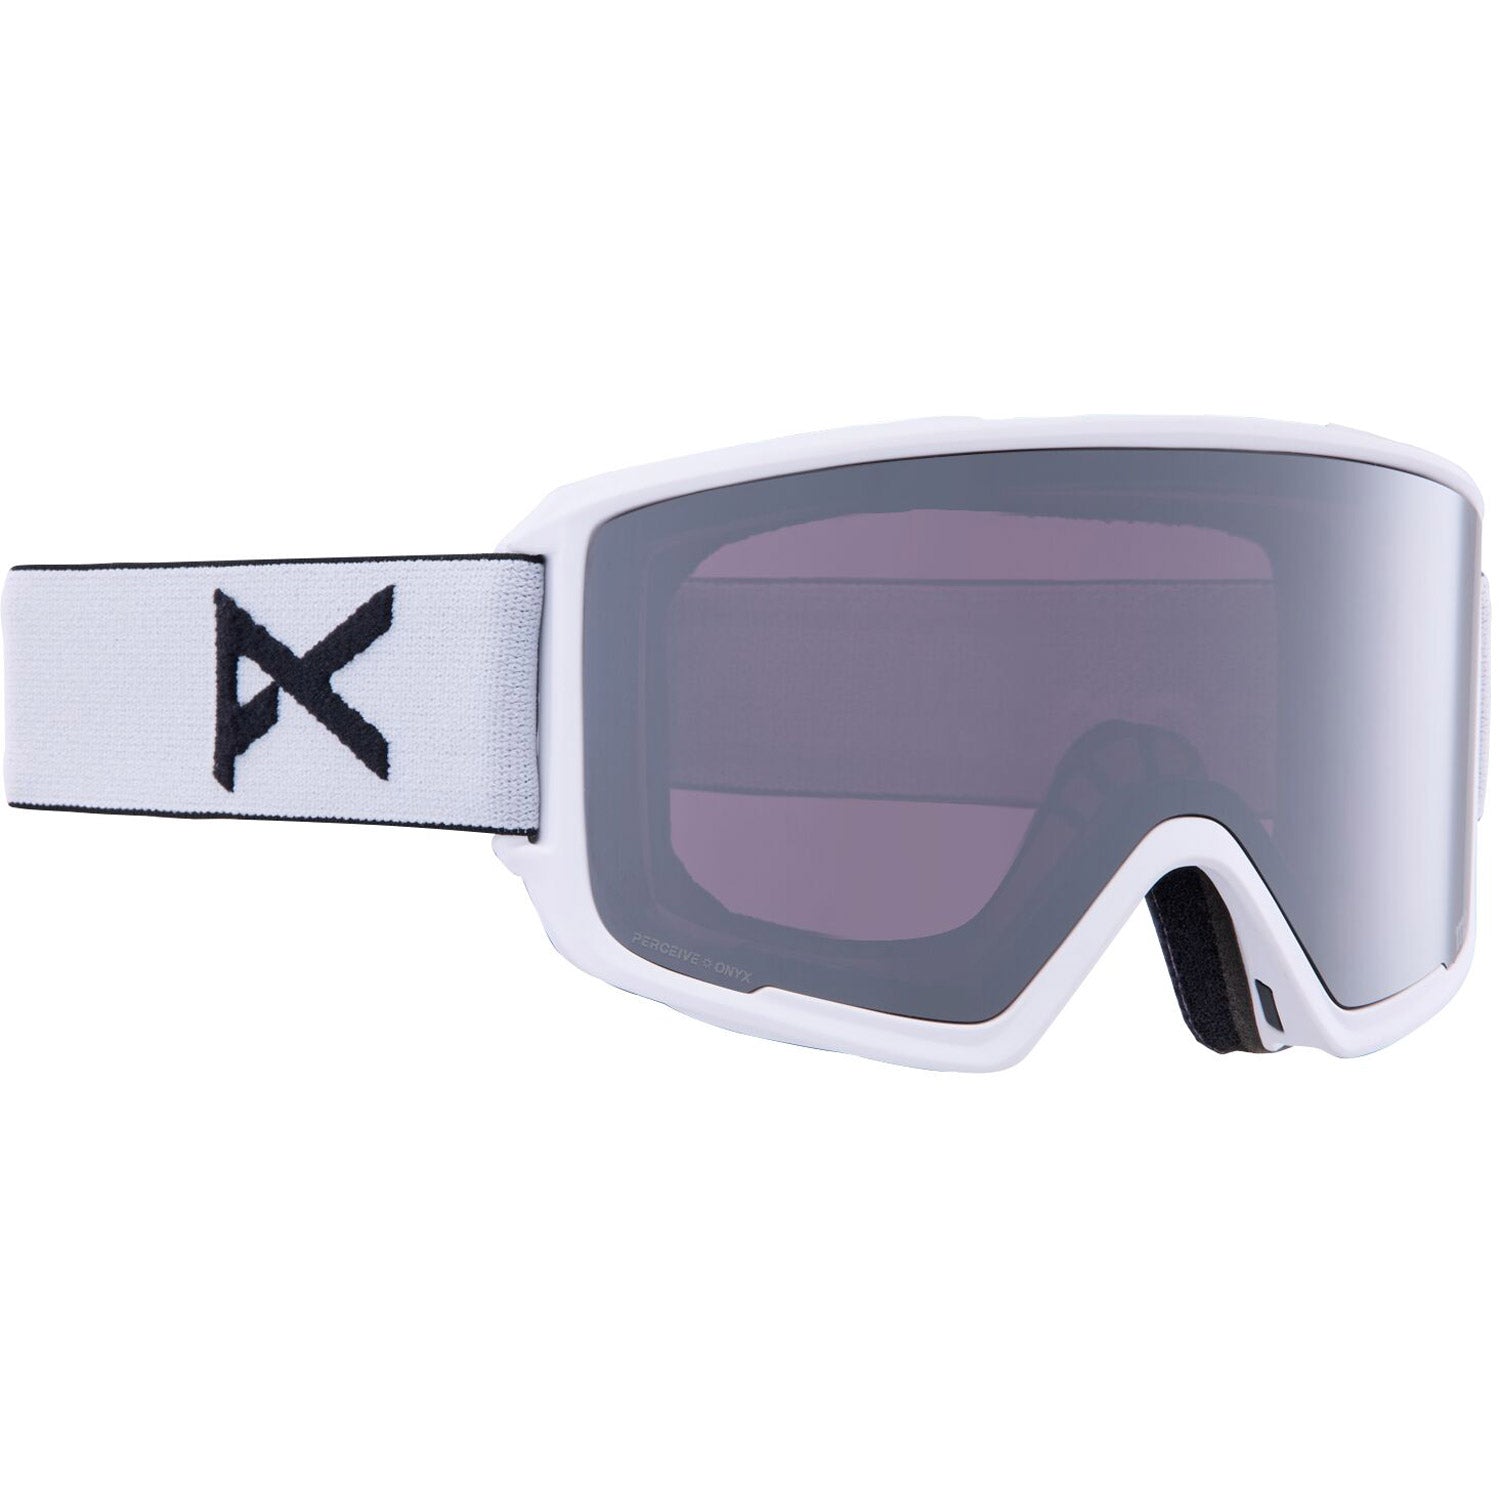 Anon M3 MFI Goggle 2023 Black - Perceive Variable Blue w/ Perceive Cloudy Pink Lens